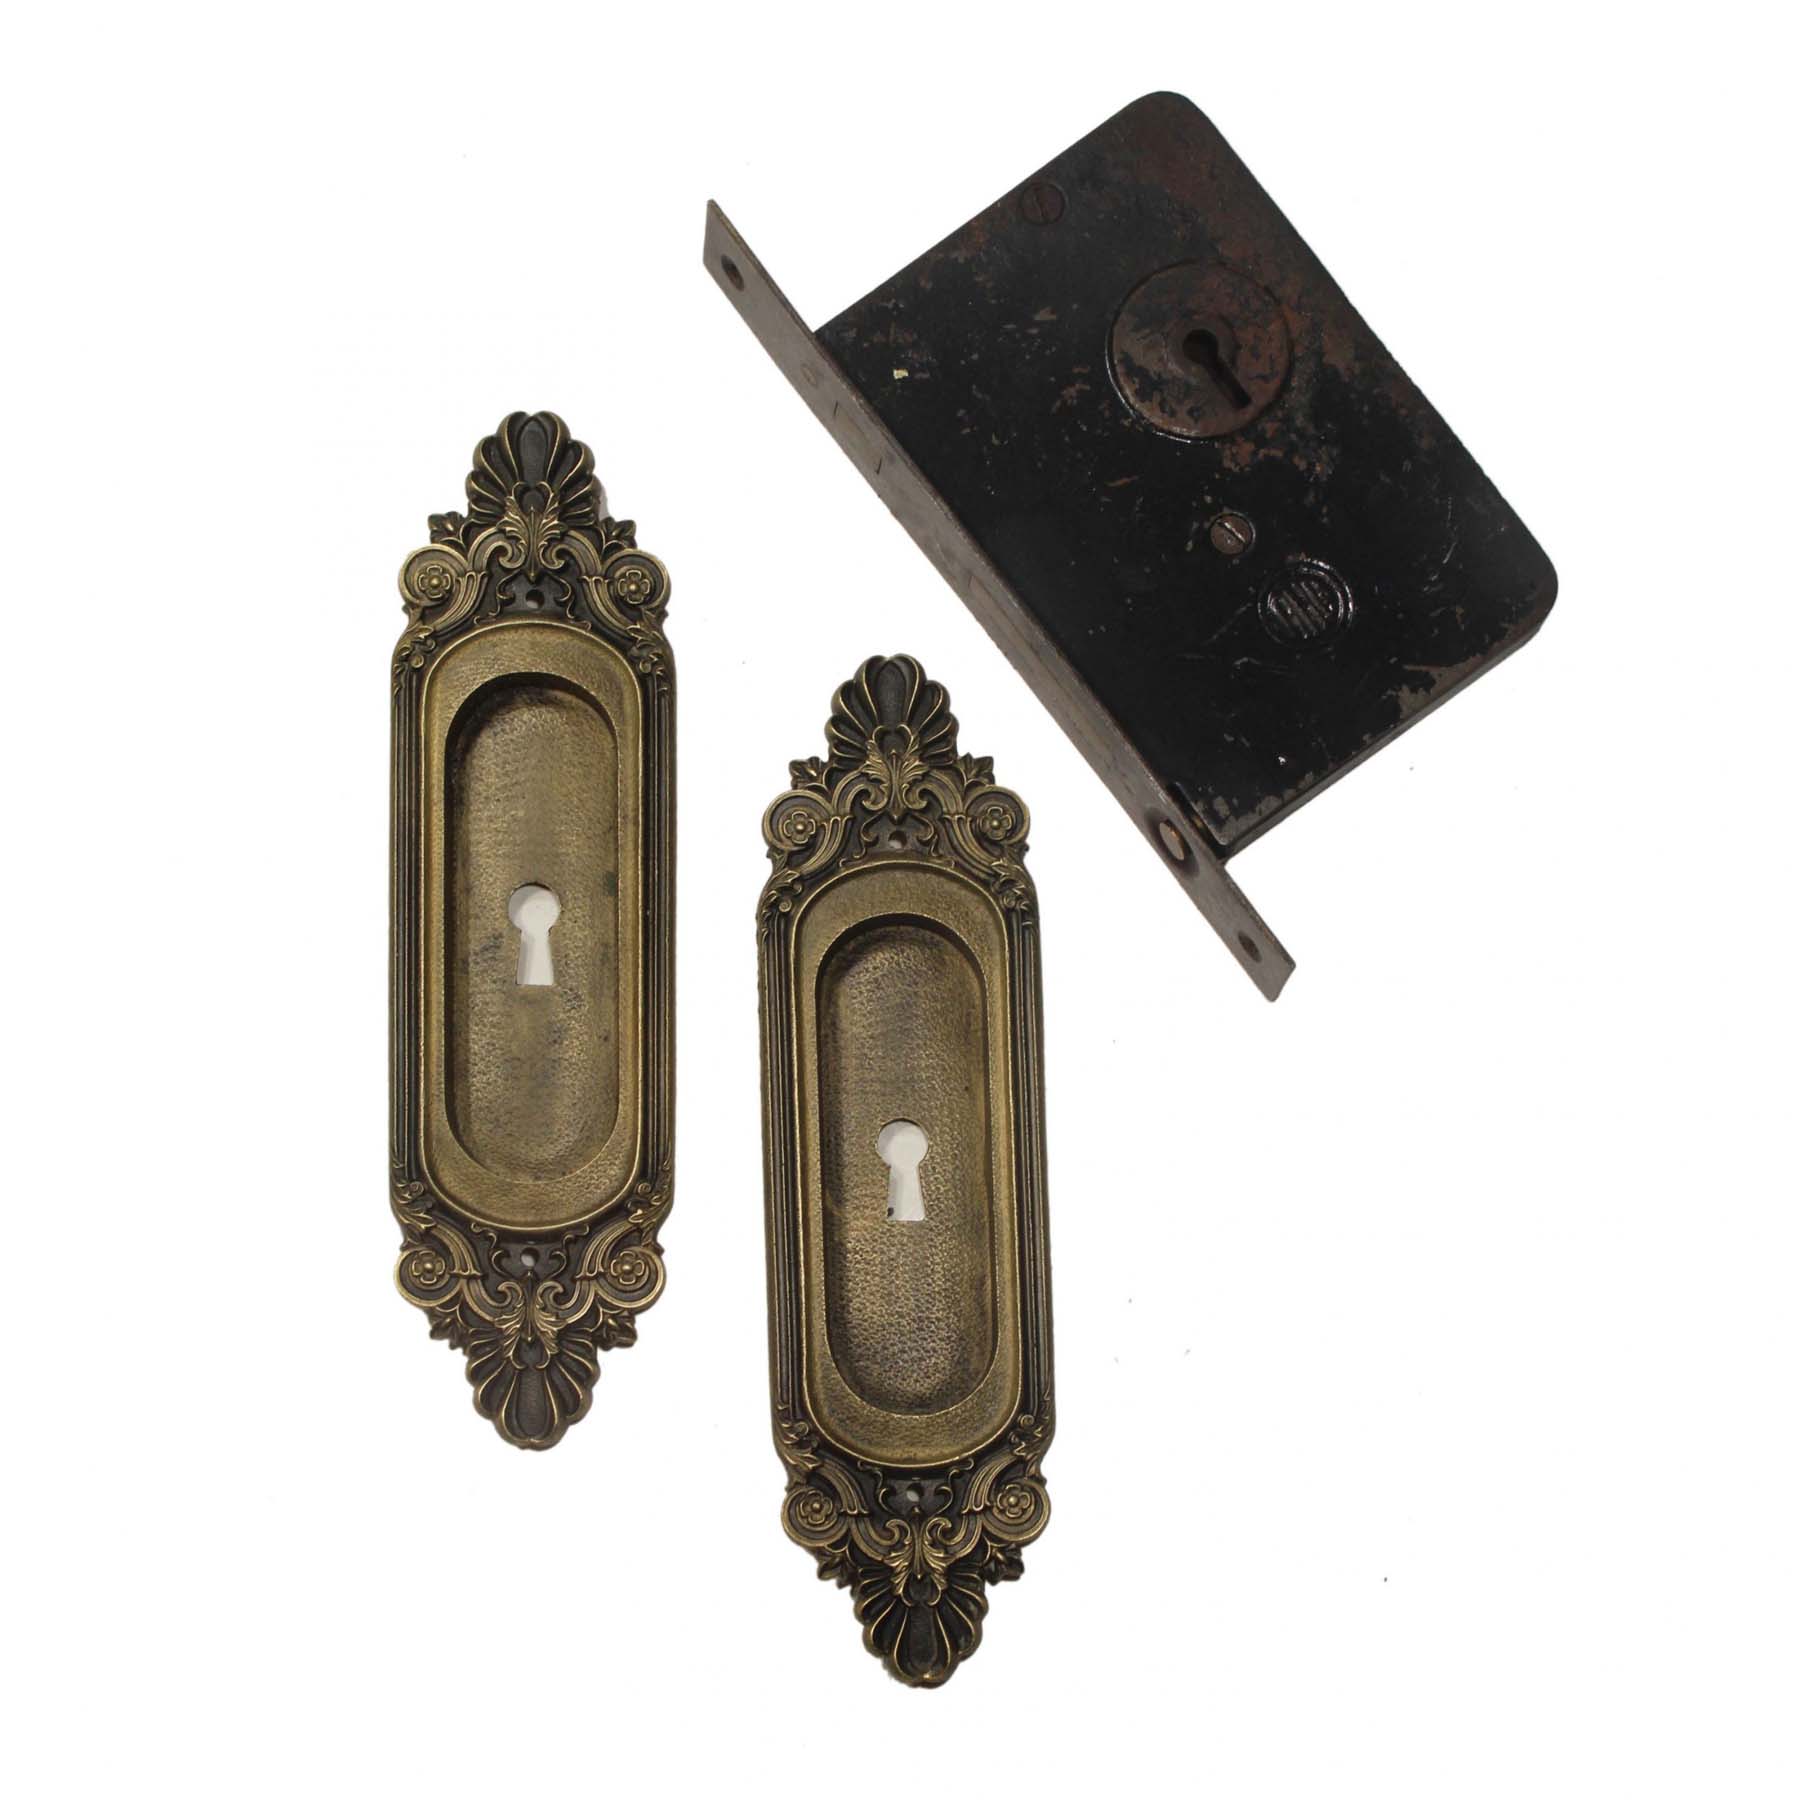 Complete Antique Brass “Olympus” Pocket Door Hardware Set by Russell & Erwin-0